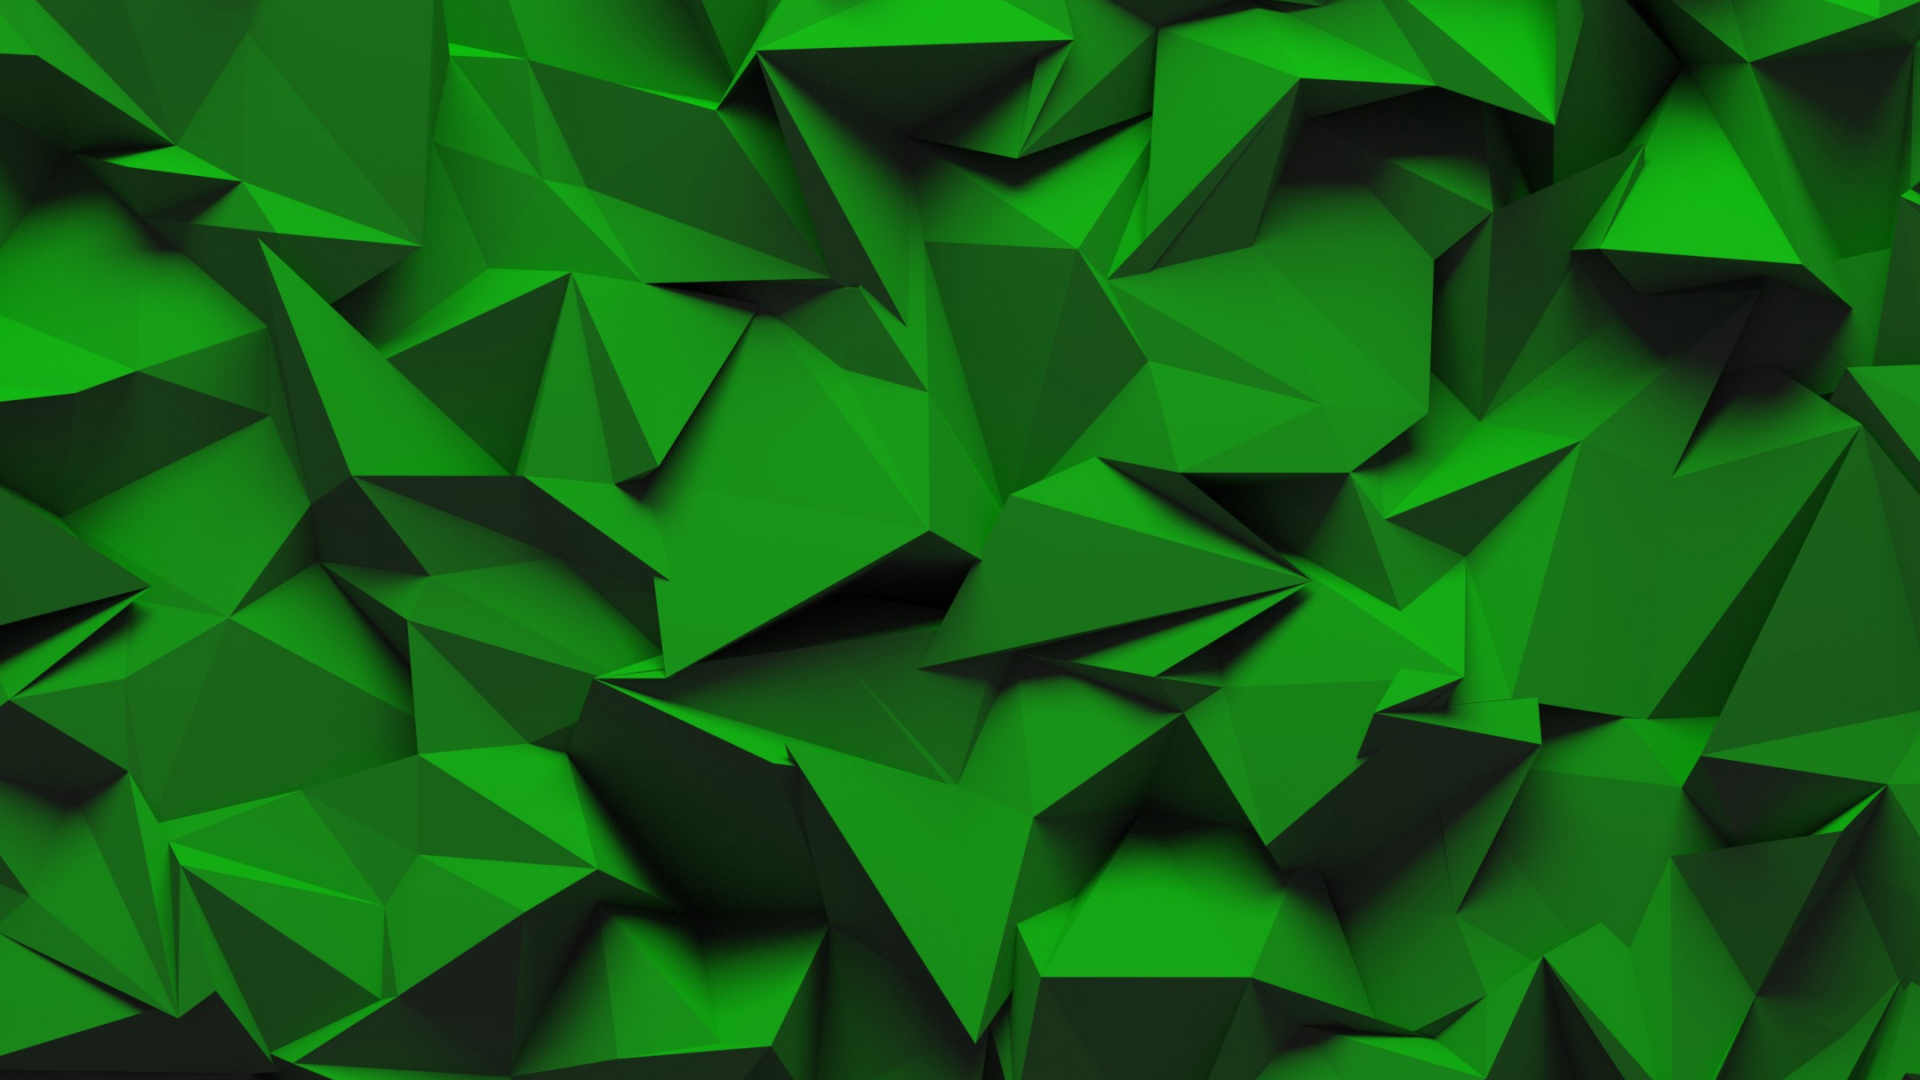 Green and Black Heart Shaped Textile. Wallpaper in 1920x1080 Resolution